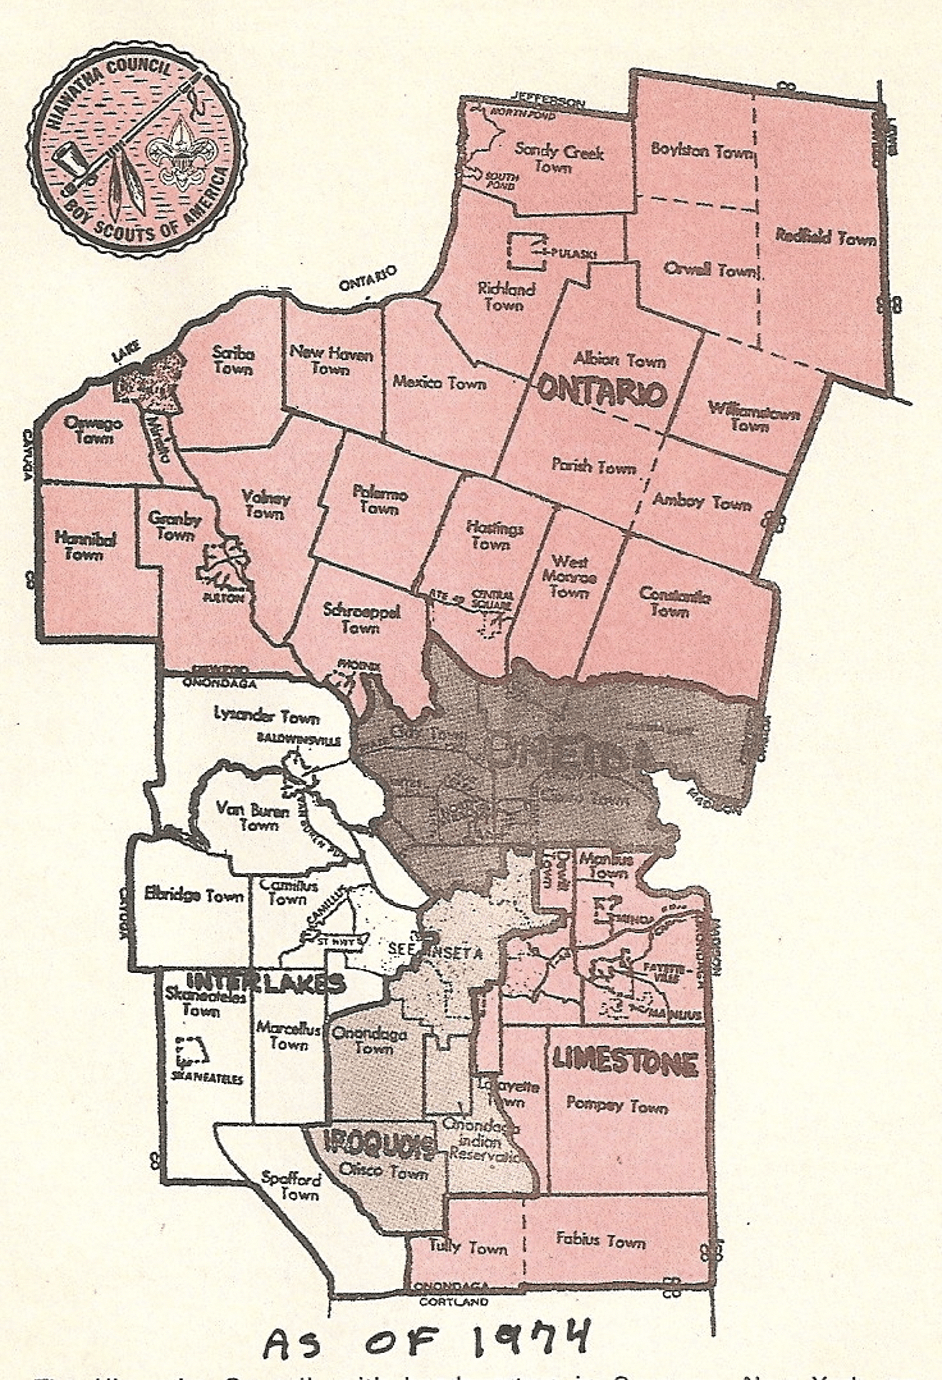 A diagram of the council district boundaries in October 1974